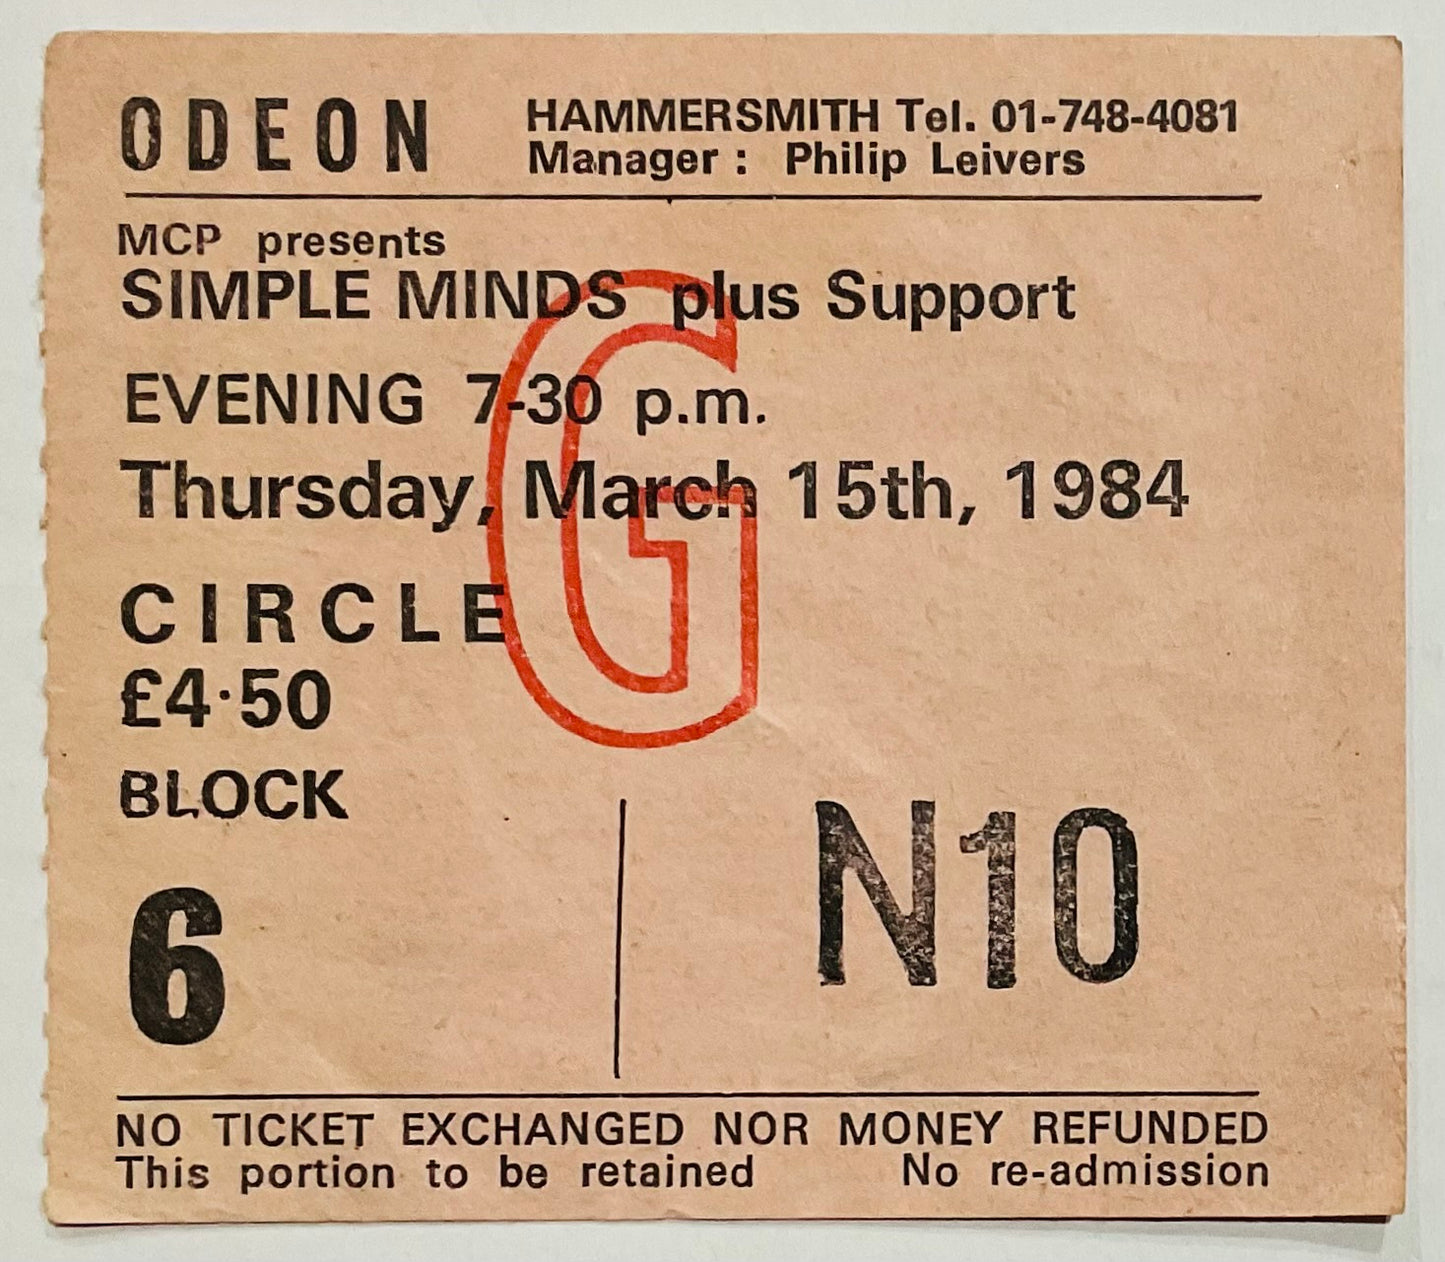 Simple Minds Original Used Concert Ticket Hammersmith Odeon London 15th Mar 1984